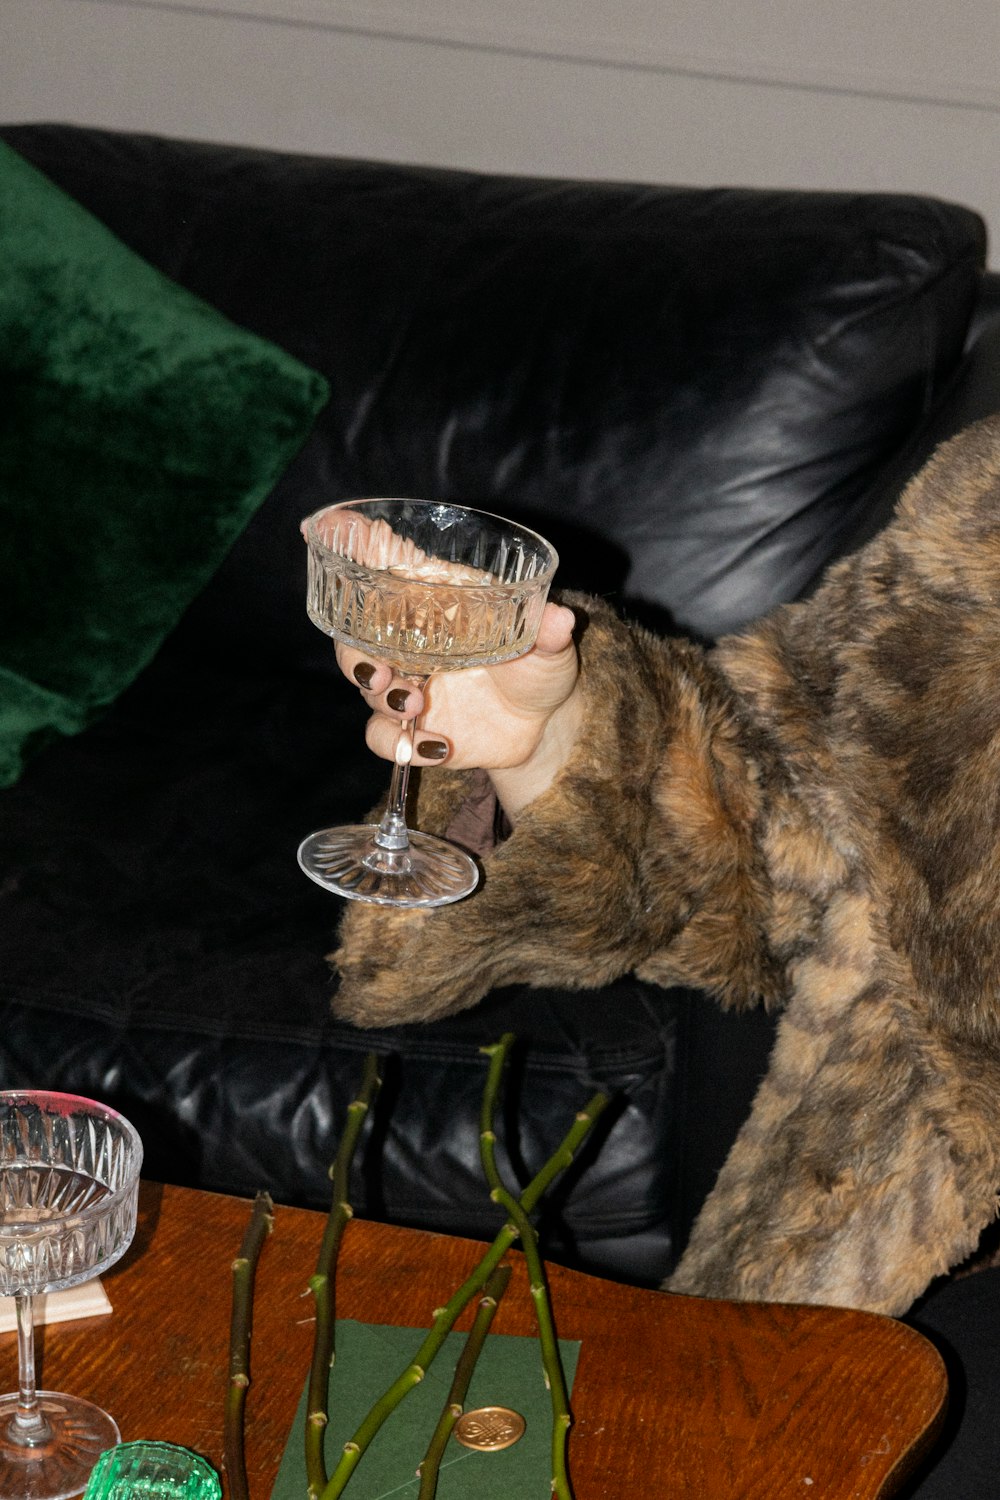 a cat sitting on a couch drinking from a wine glass